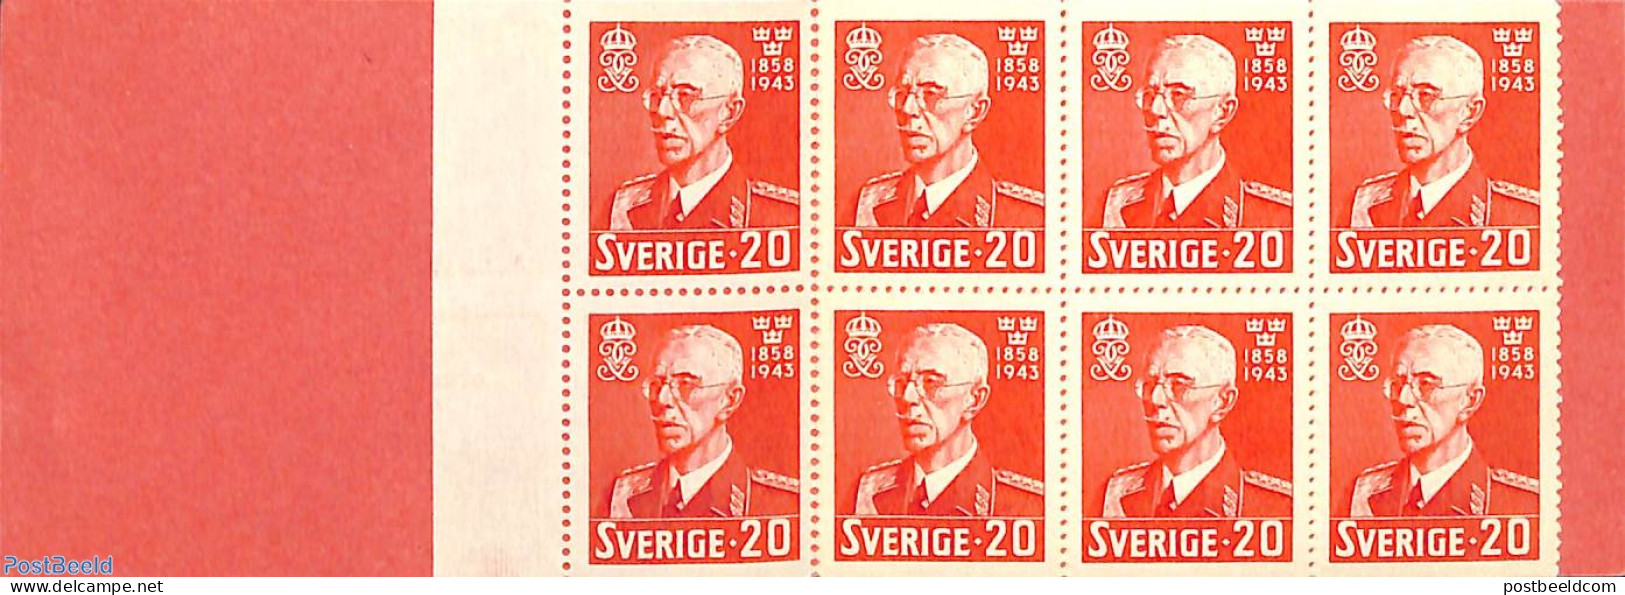 Sweden 1943 King Gustav V 85th Anniversary, Booklet, Mint NH, History - Kings & Queens (Royalty) - Stamp Booklets - Neufs